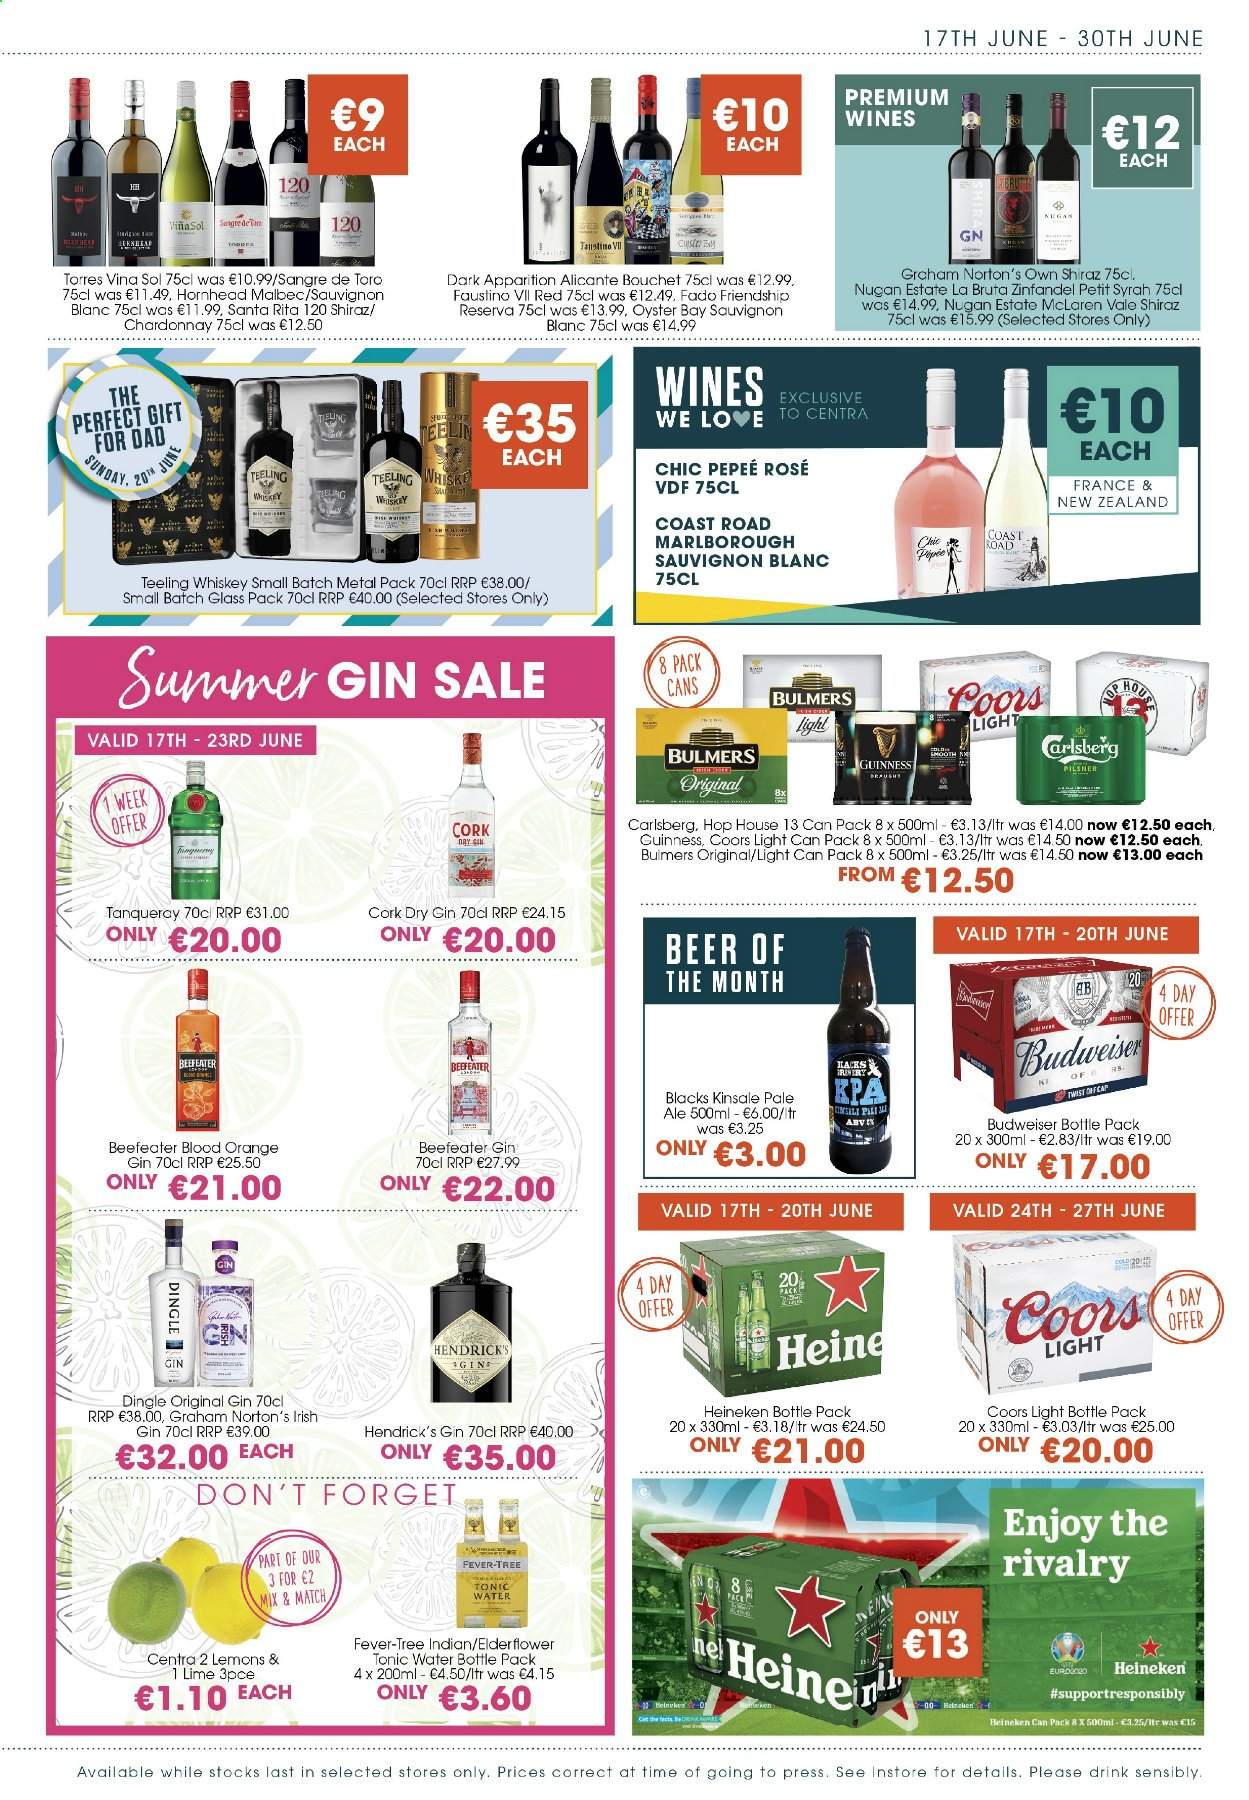 thumbnail - Centra offer  - 17.06.2021 - 30.06.2021 - Sales products - Budweiser, Coors, lemons, oysters, tonic, red wine, white wine, Chardonnay, wine, Syrah, Shiraz, Sauvignon Blanc, rosé wine, gin, whiskey, Beefeater, Hendrick's, whisky, beer, Heineken, Bulmers, Carlsberg, Guinness, Sol, drink bottle. Page 7.